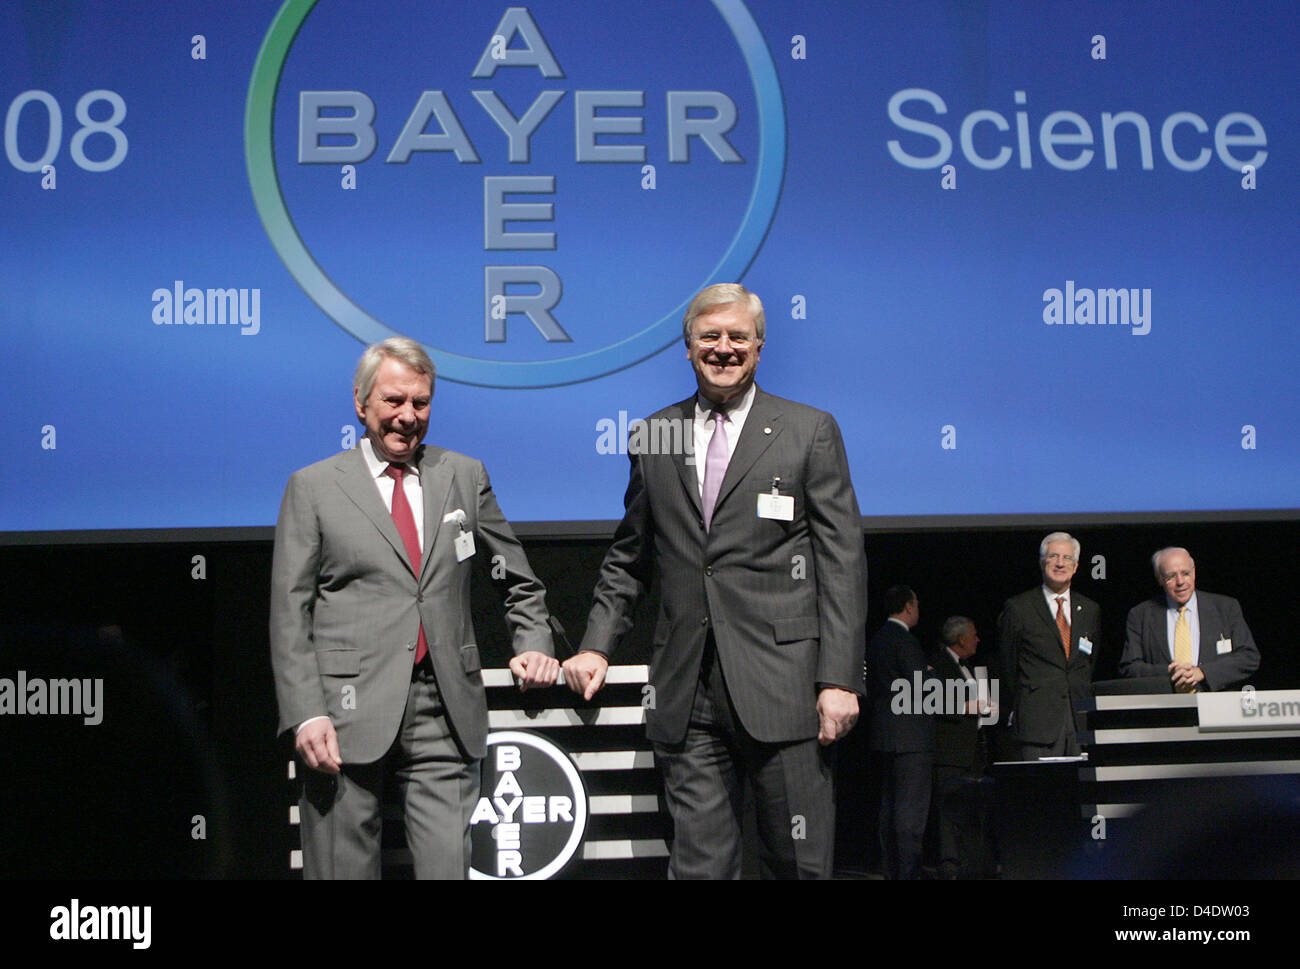 CEO of Bayer AG, Werner Wenning (R), and chairman of the supervisory board Manfred Schneider (L), pose at the outset of the company's general meeting in Cologne, Germany, 25 April 2008. The German chemical and pharmaceutical company targets another record year for 2008, regardless of the slowing world economy and instable development of the price of raw materials. Photo: OLIVER BER Stock Photo